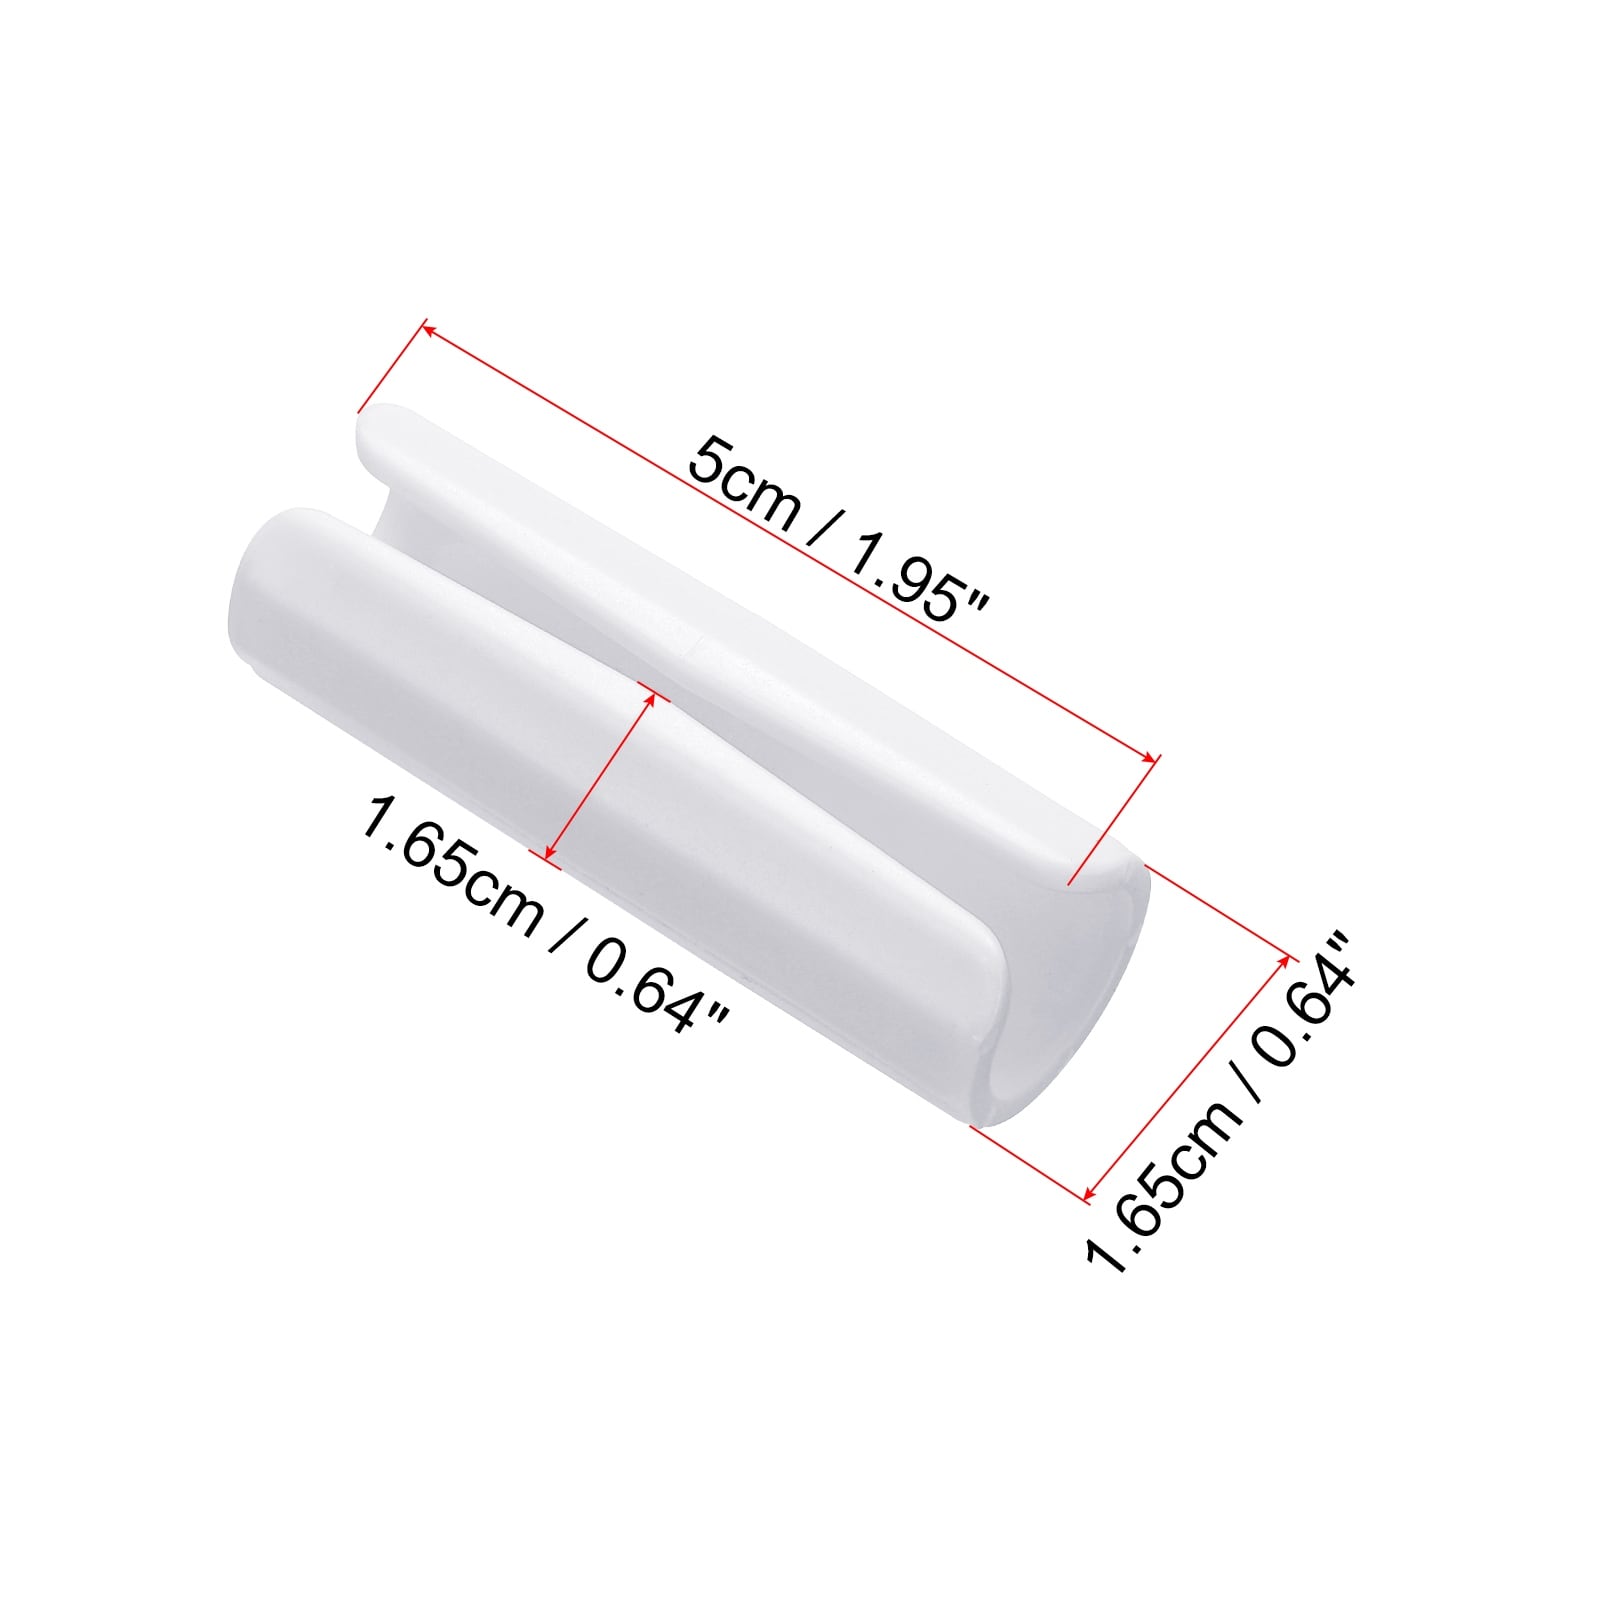 https://ak1.ostkcdn.com/images/products/is/images/direct/87a73114d1d00aa9be3ebbdf8075b181b183be22/1.9x0.64inch-Bed-Sheet-Clips%2C-1Set%2812Pcs-%29Mattress-Covers-Fastener-Clamp-Grey.jpg